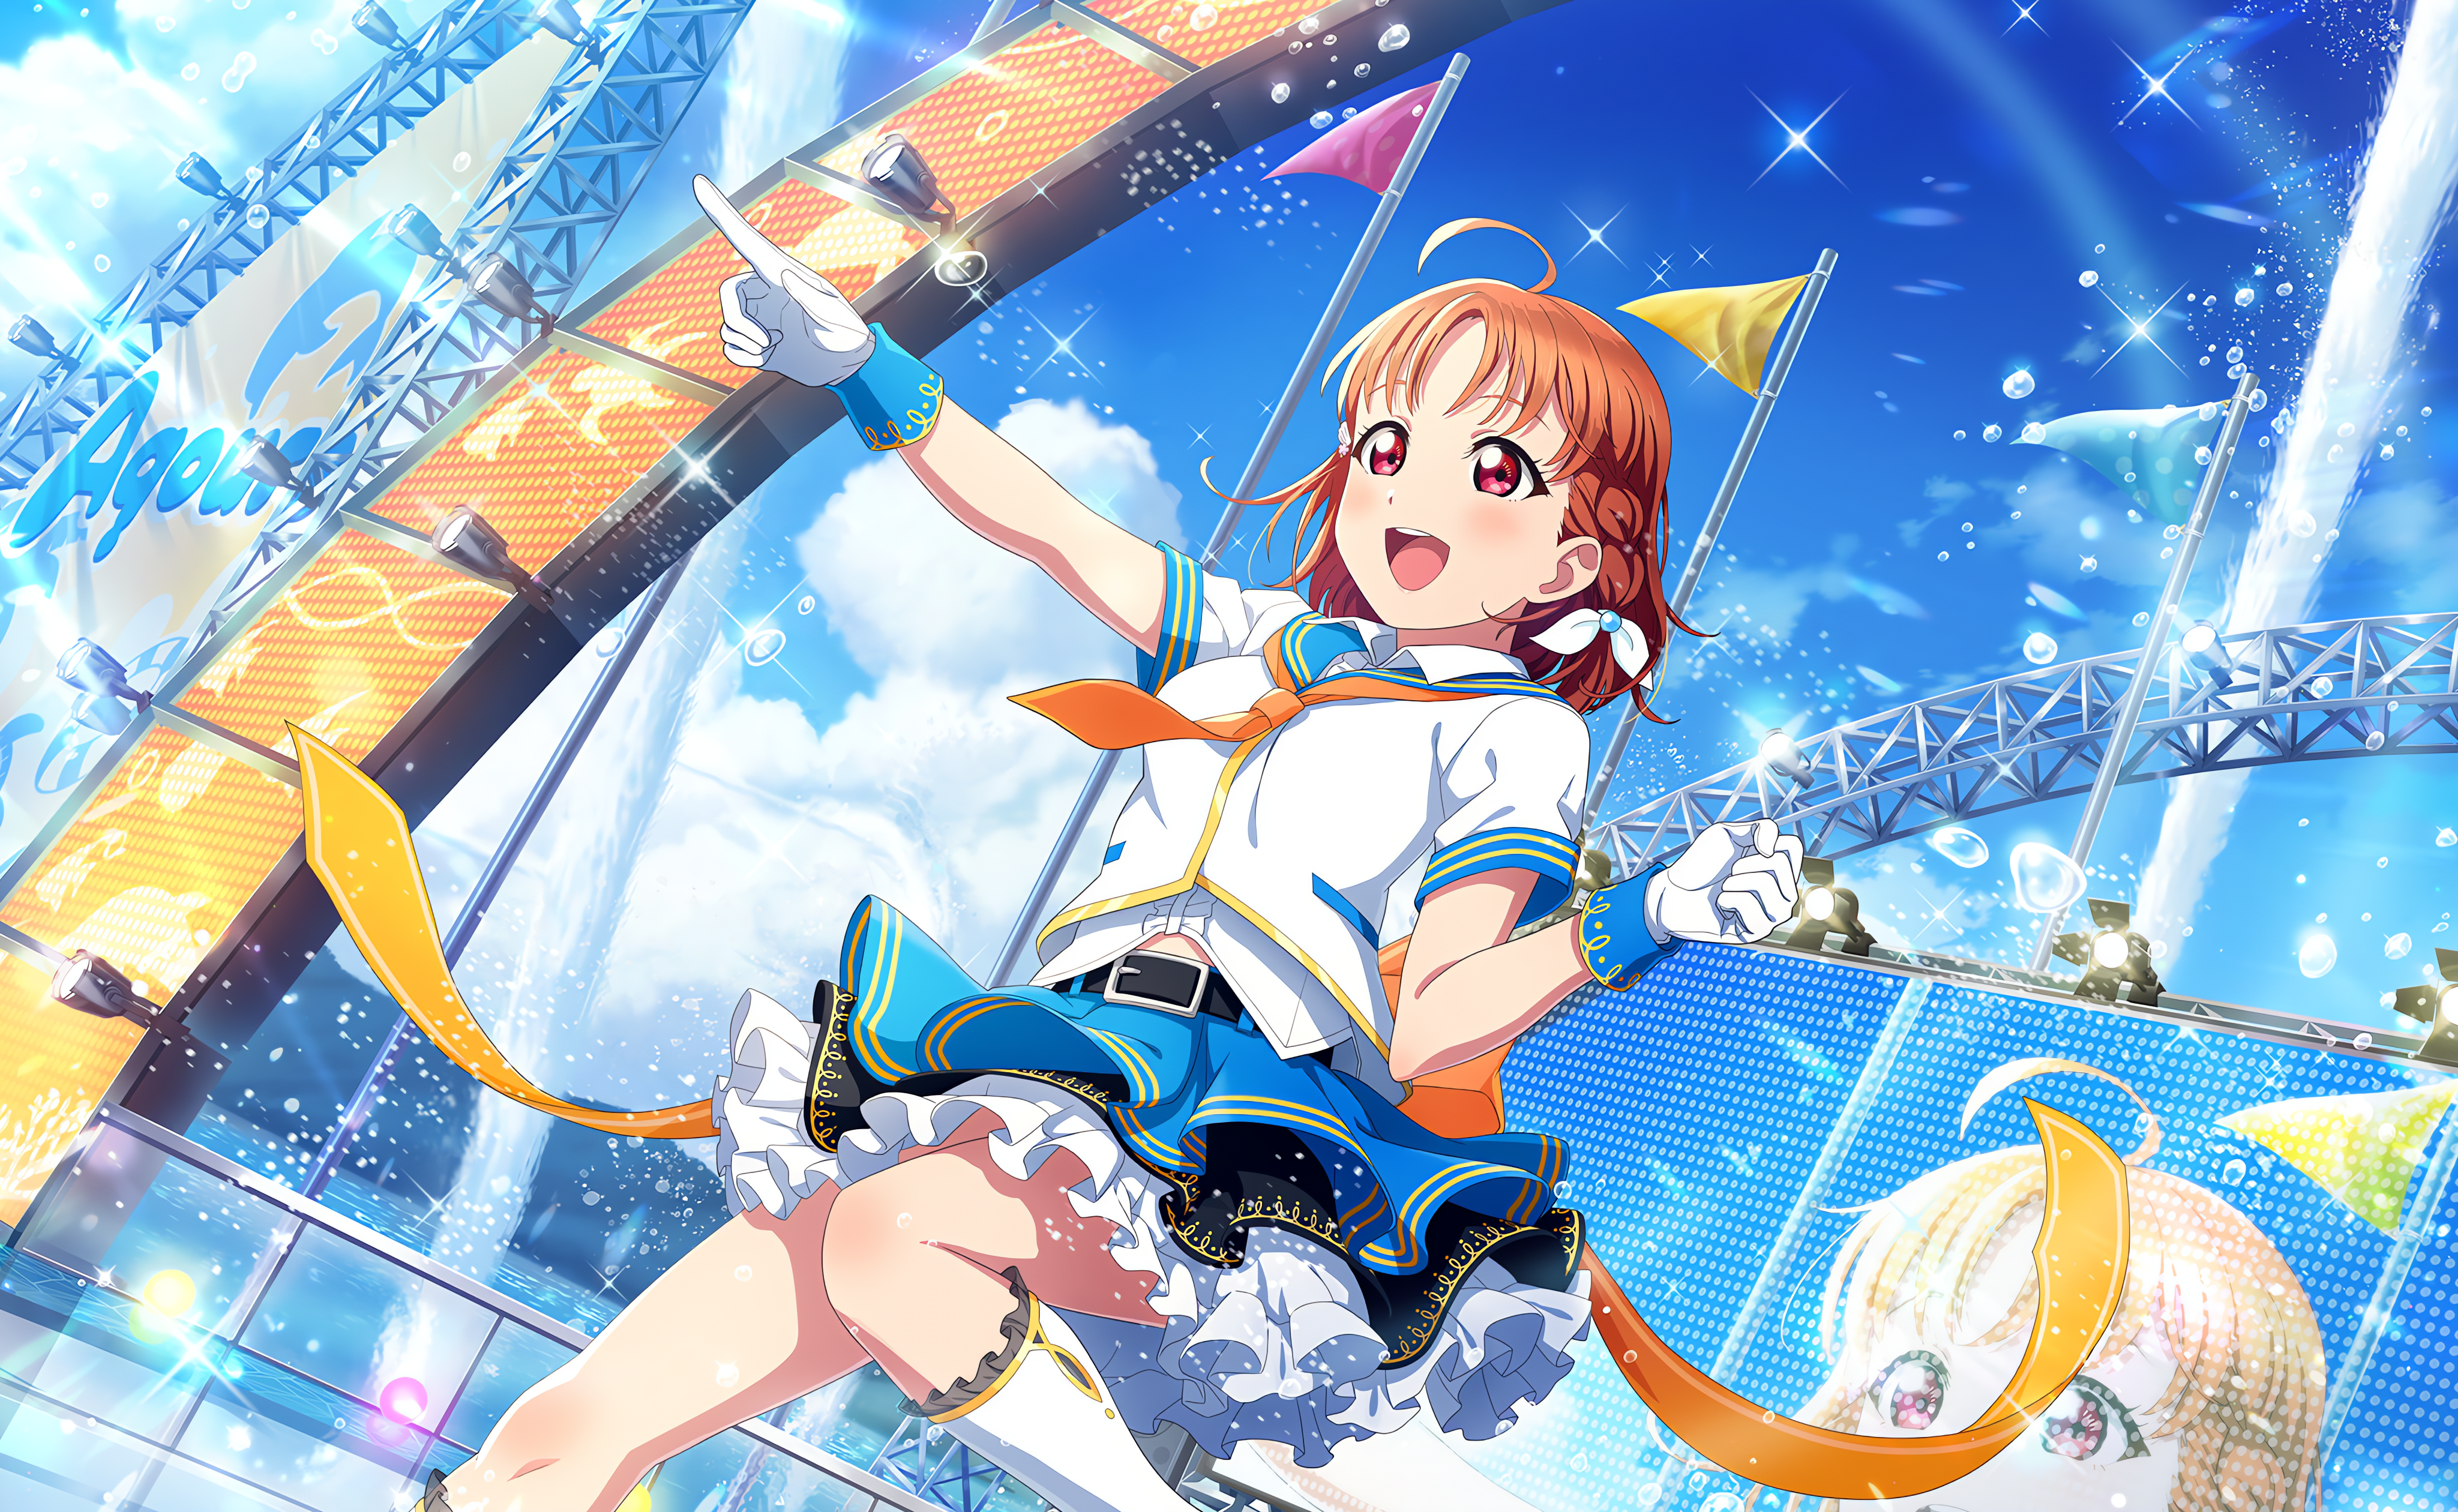 Anime 4096x2520 Takami Chika Love Live! Love Live! Sunshine anime anime girls gloves stars clouds sky flag finger pointing open mouth blushing tie looking away water drops uniform